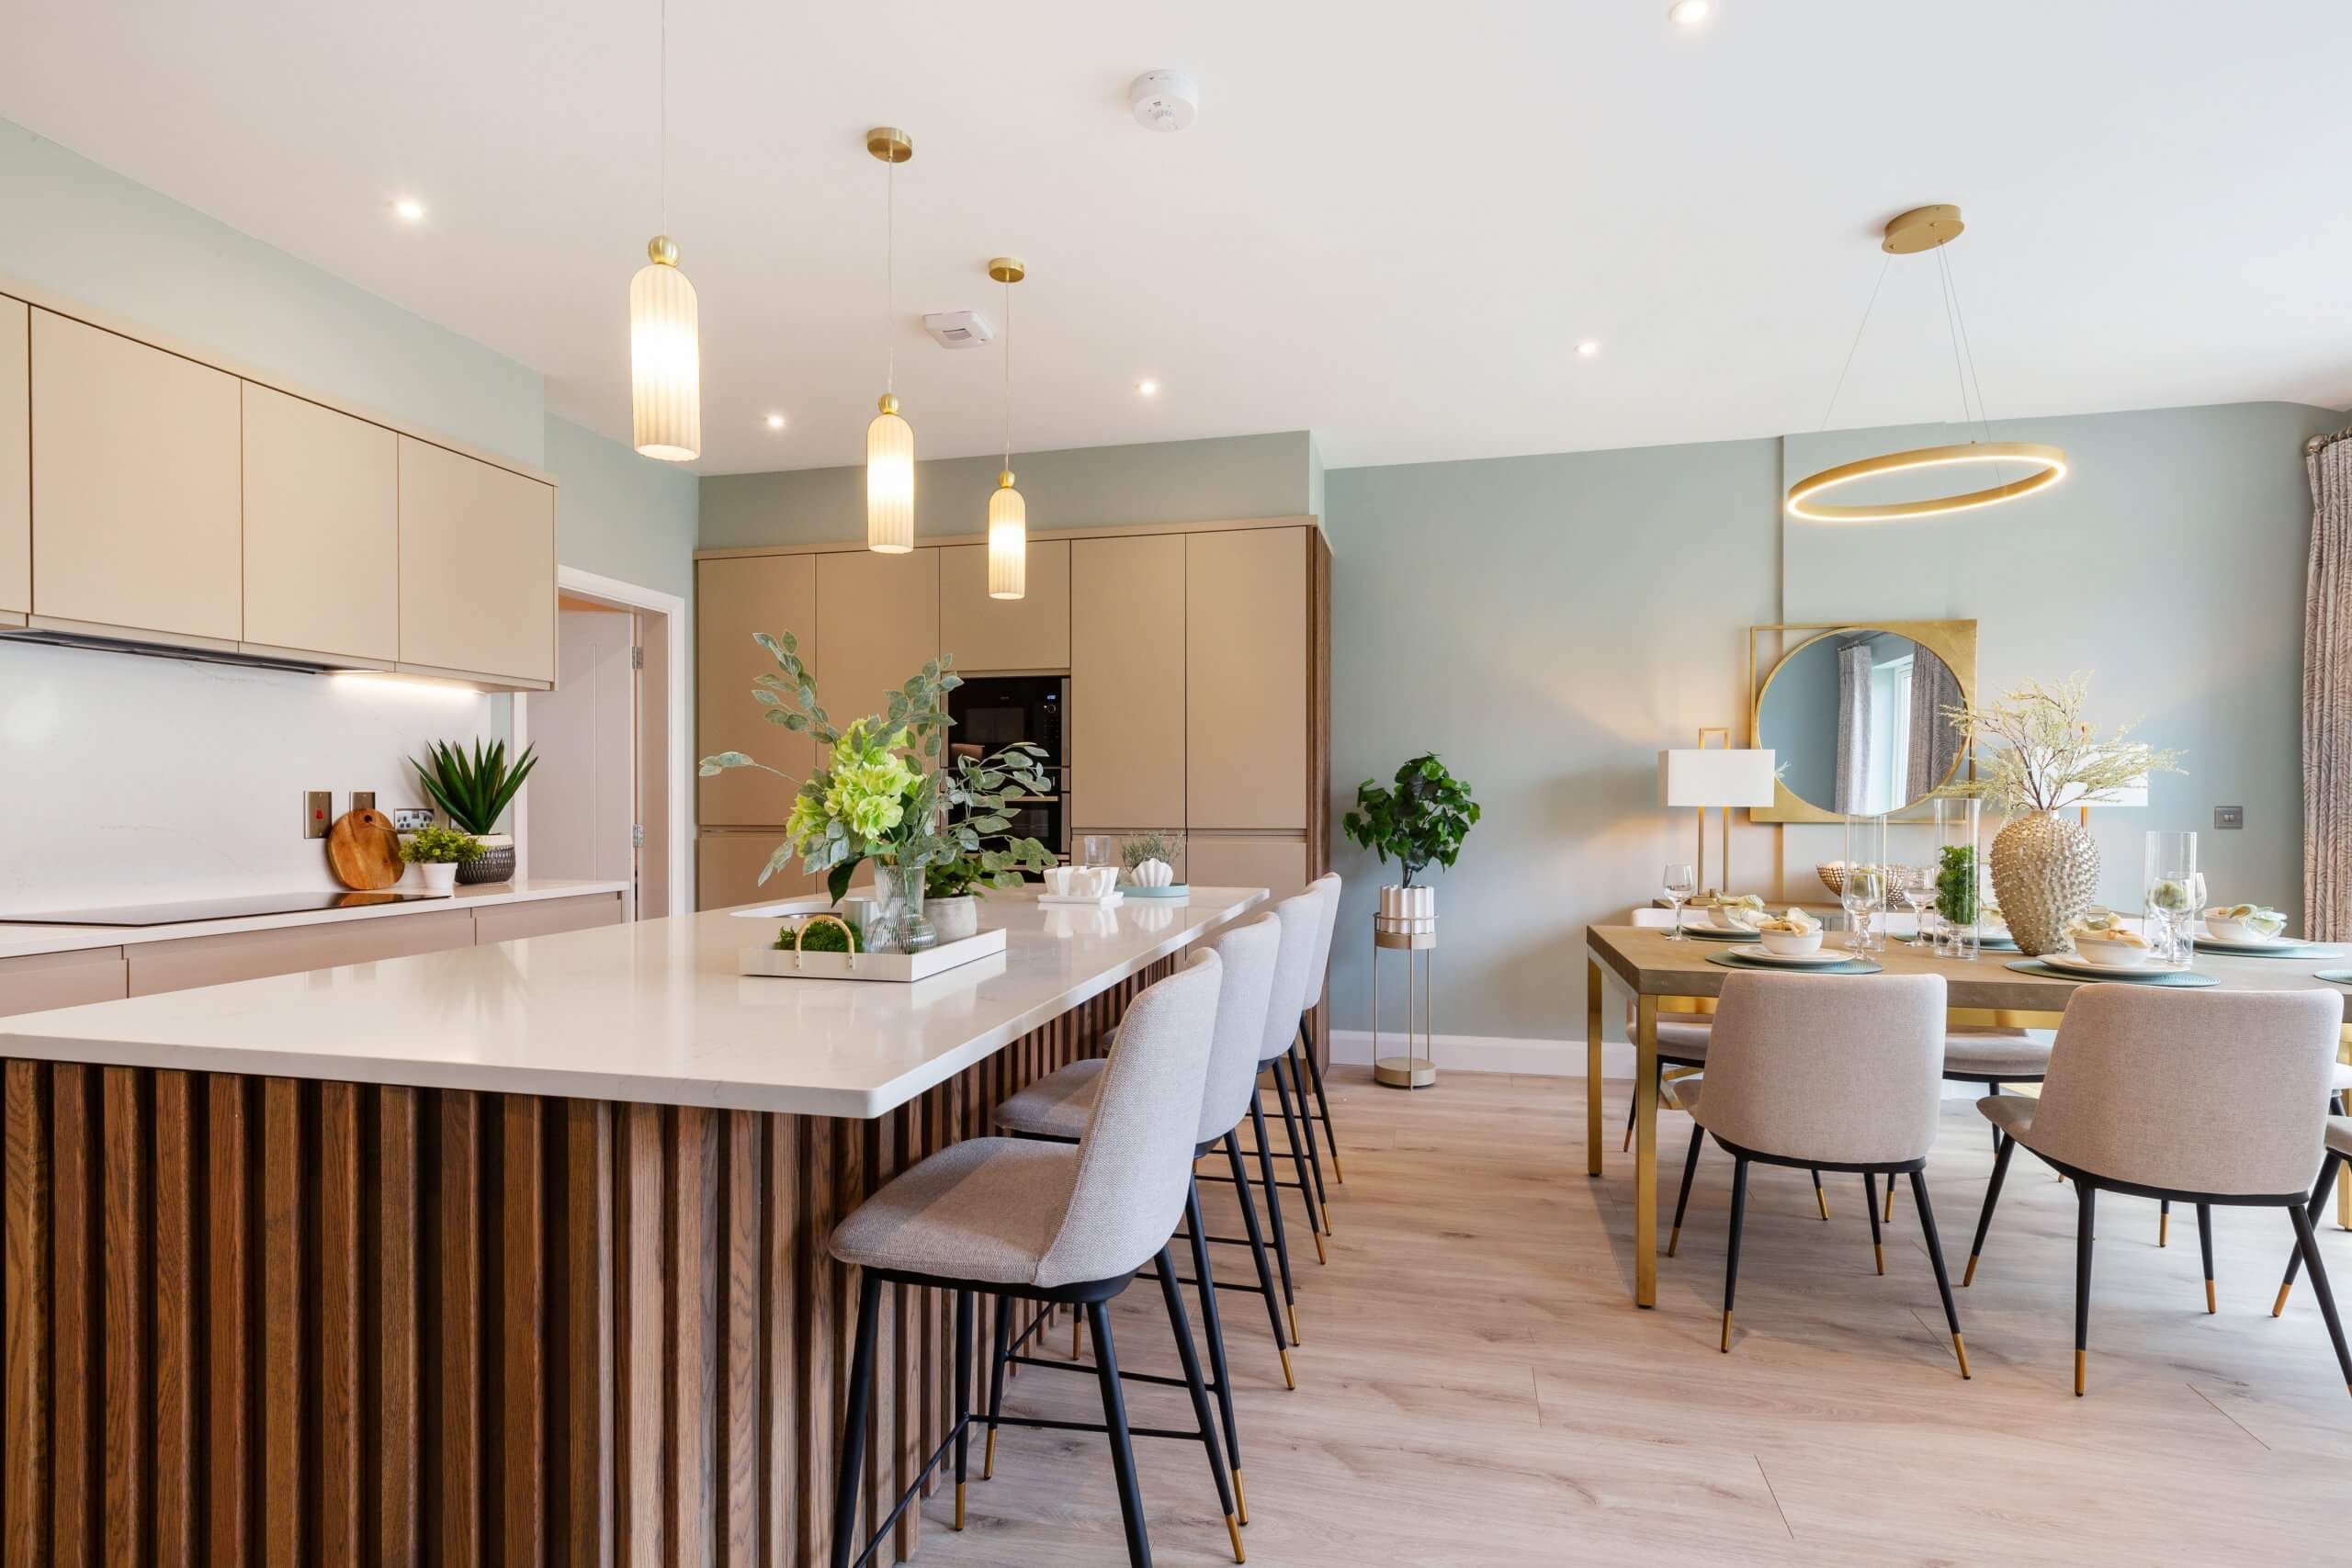 Kitchen, living and dining area at Wellfield, Malahide